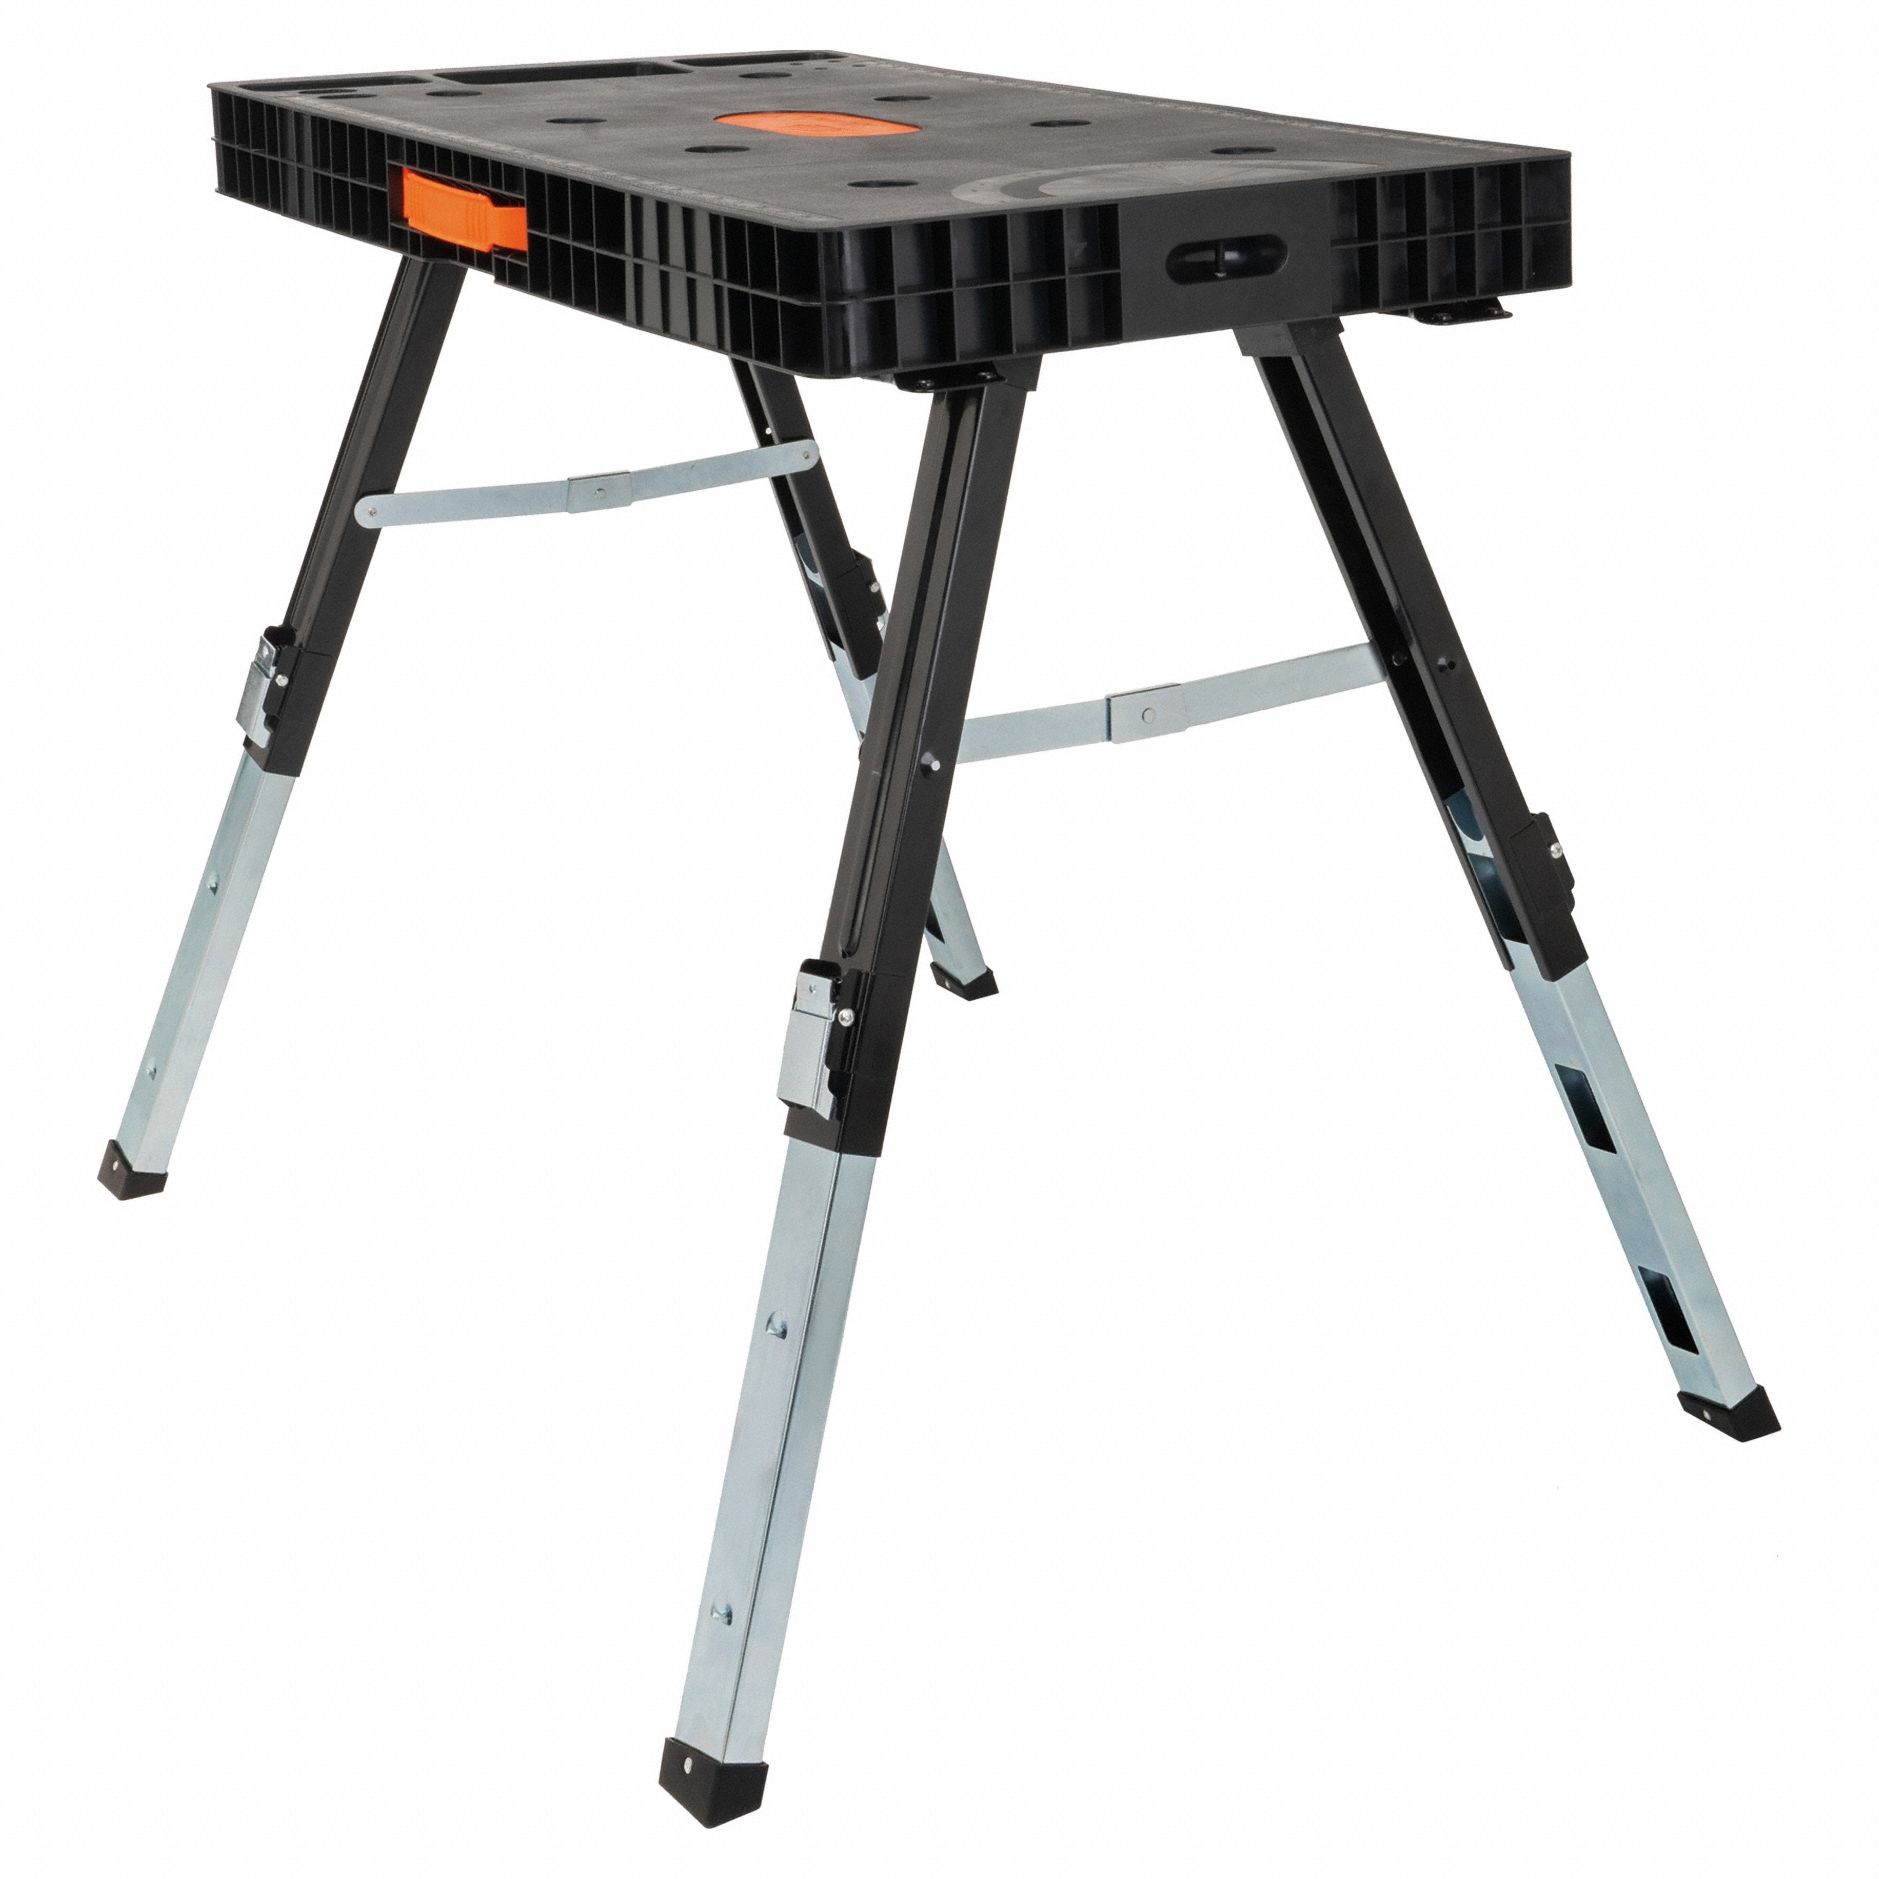 WORKTABLE: Adj Ht, Plastic, 20 in Overall Wd, 330 lb Overall Load Capacity